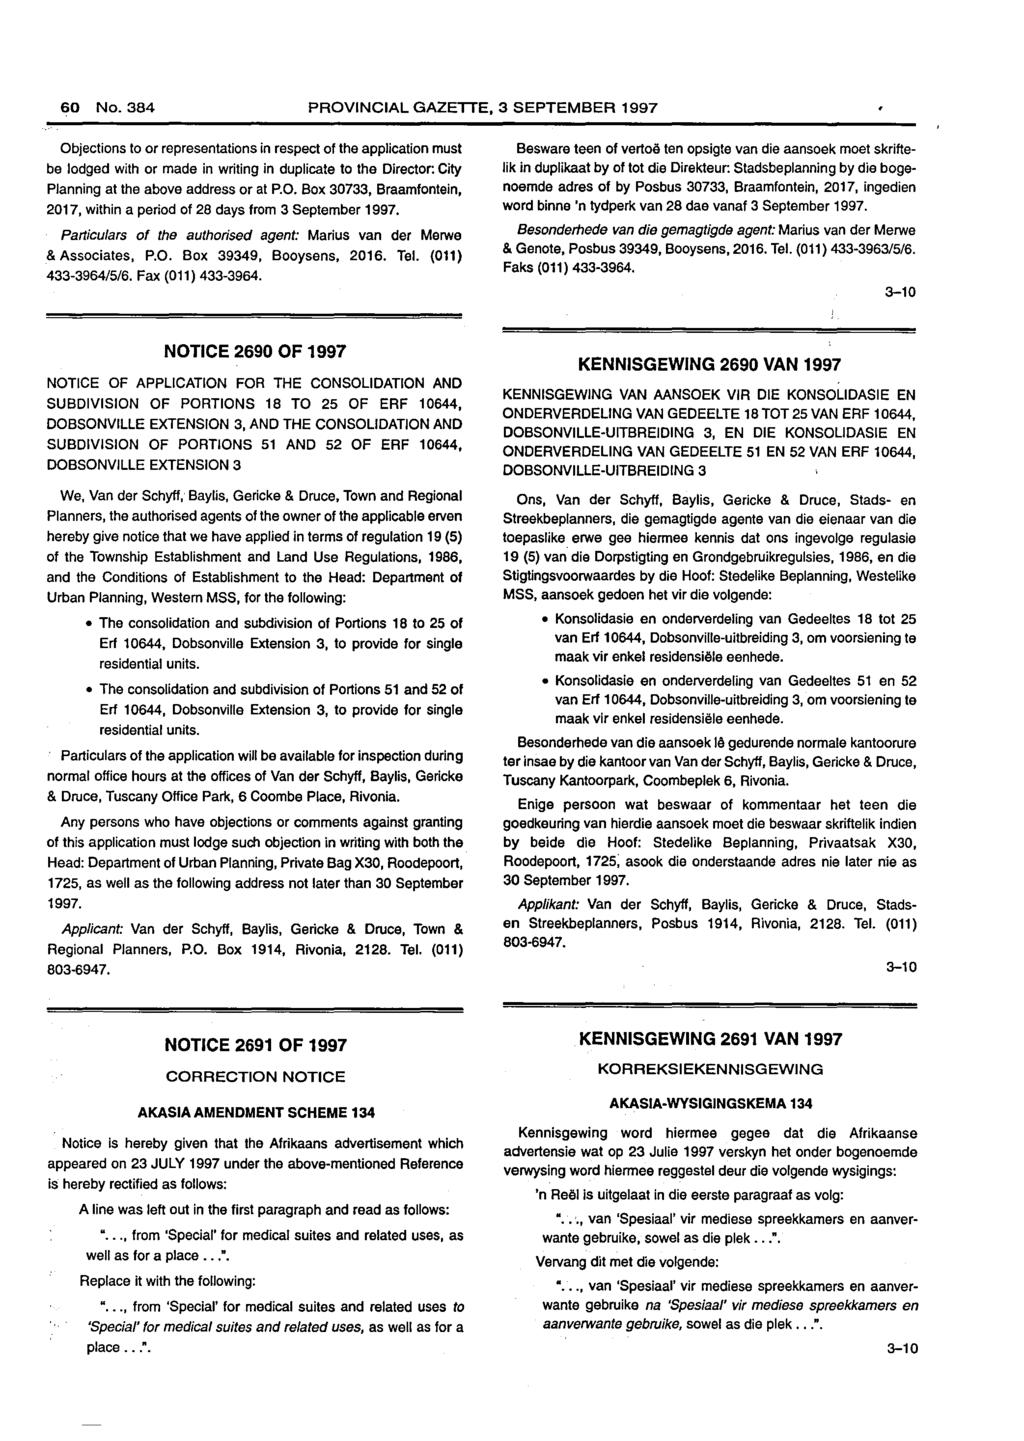 60 No. PROVINCIAL GAZETTE, 3 SEPTEMBER 1997 be lodged with or made in writing in duplicate to the Director: City Planning at the above address or at P.O. Box 30733, Braamfontein, 2017, within a period of 28 days from Particulars of the authorised agent: Marius van der Merwe & Associates, P.